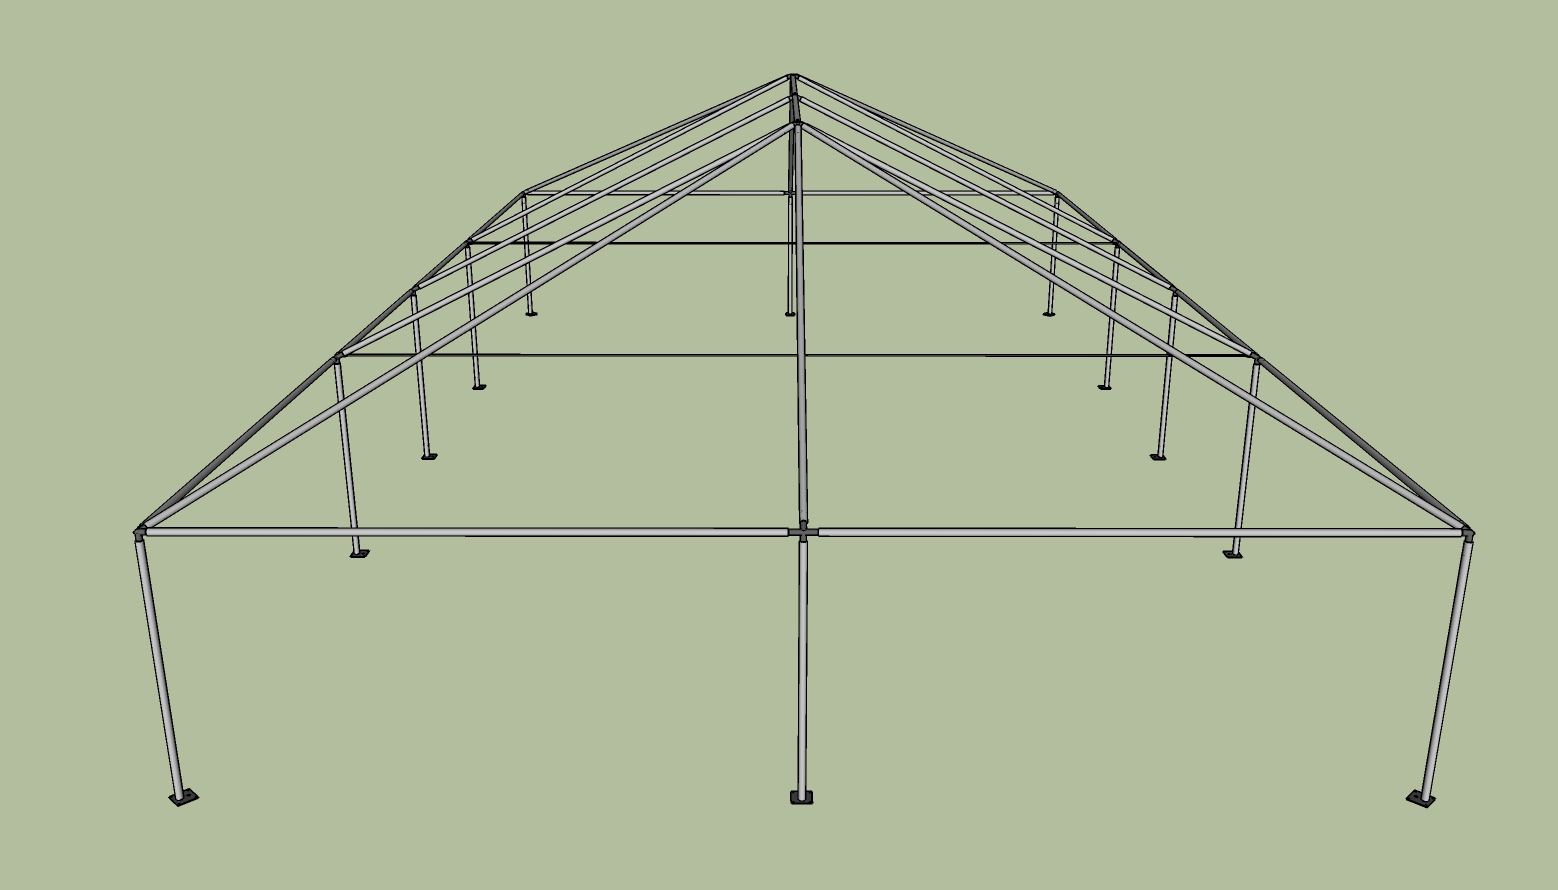 30x50 frame tent side view